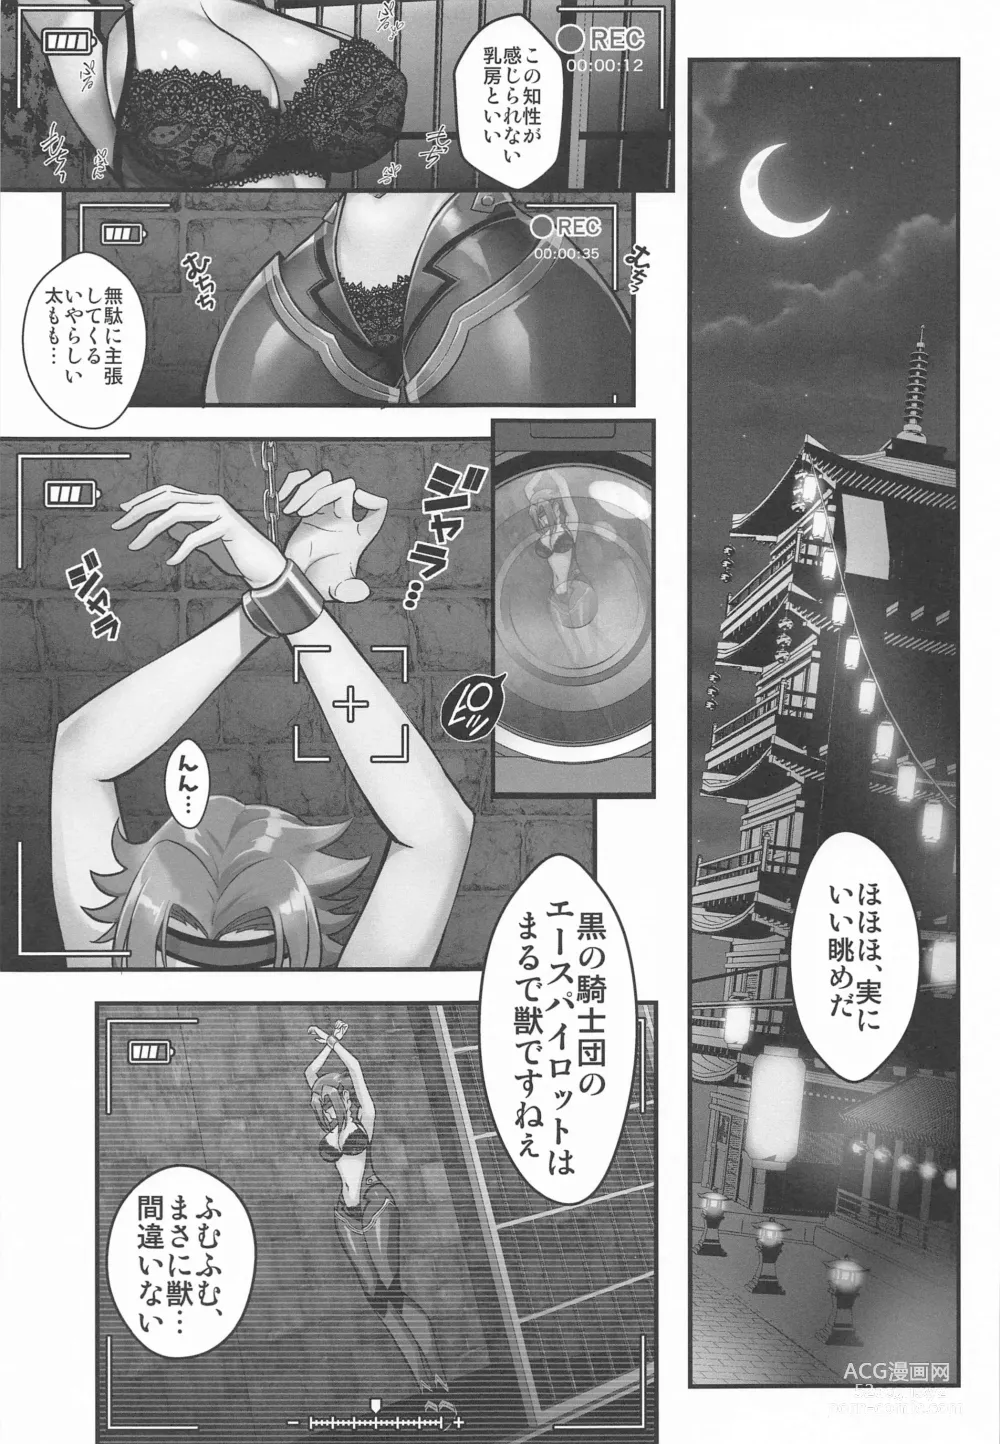 Page 6 of doujinshi Ace of Captive